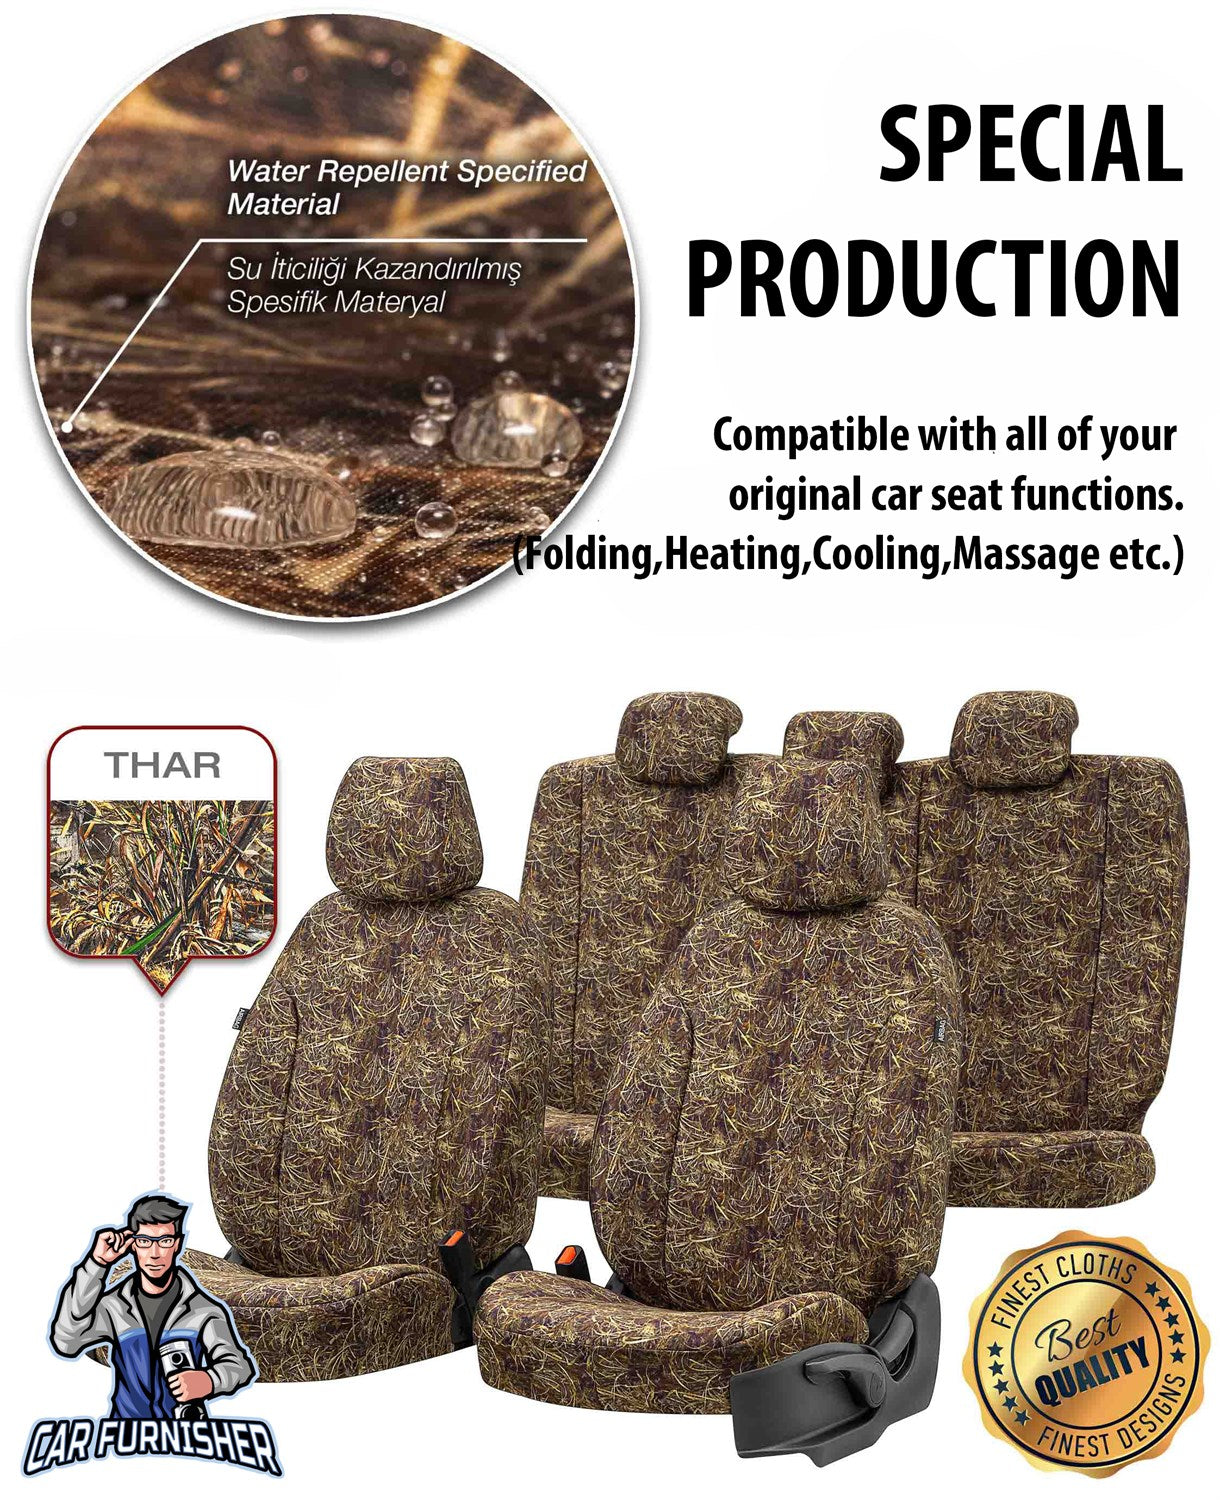 Landrover Freelander Car Seat Covers 1998-2012 Camouflage Design Montblanc Camo Waterproof Fabric